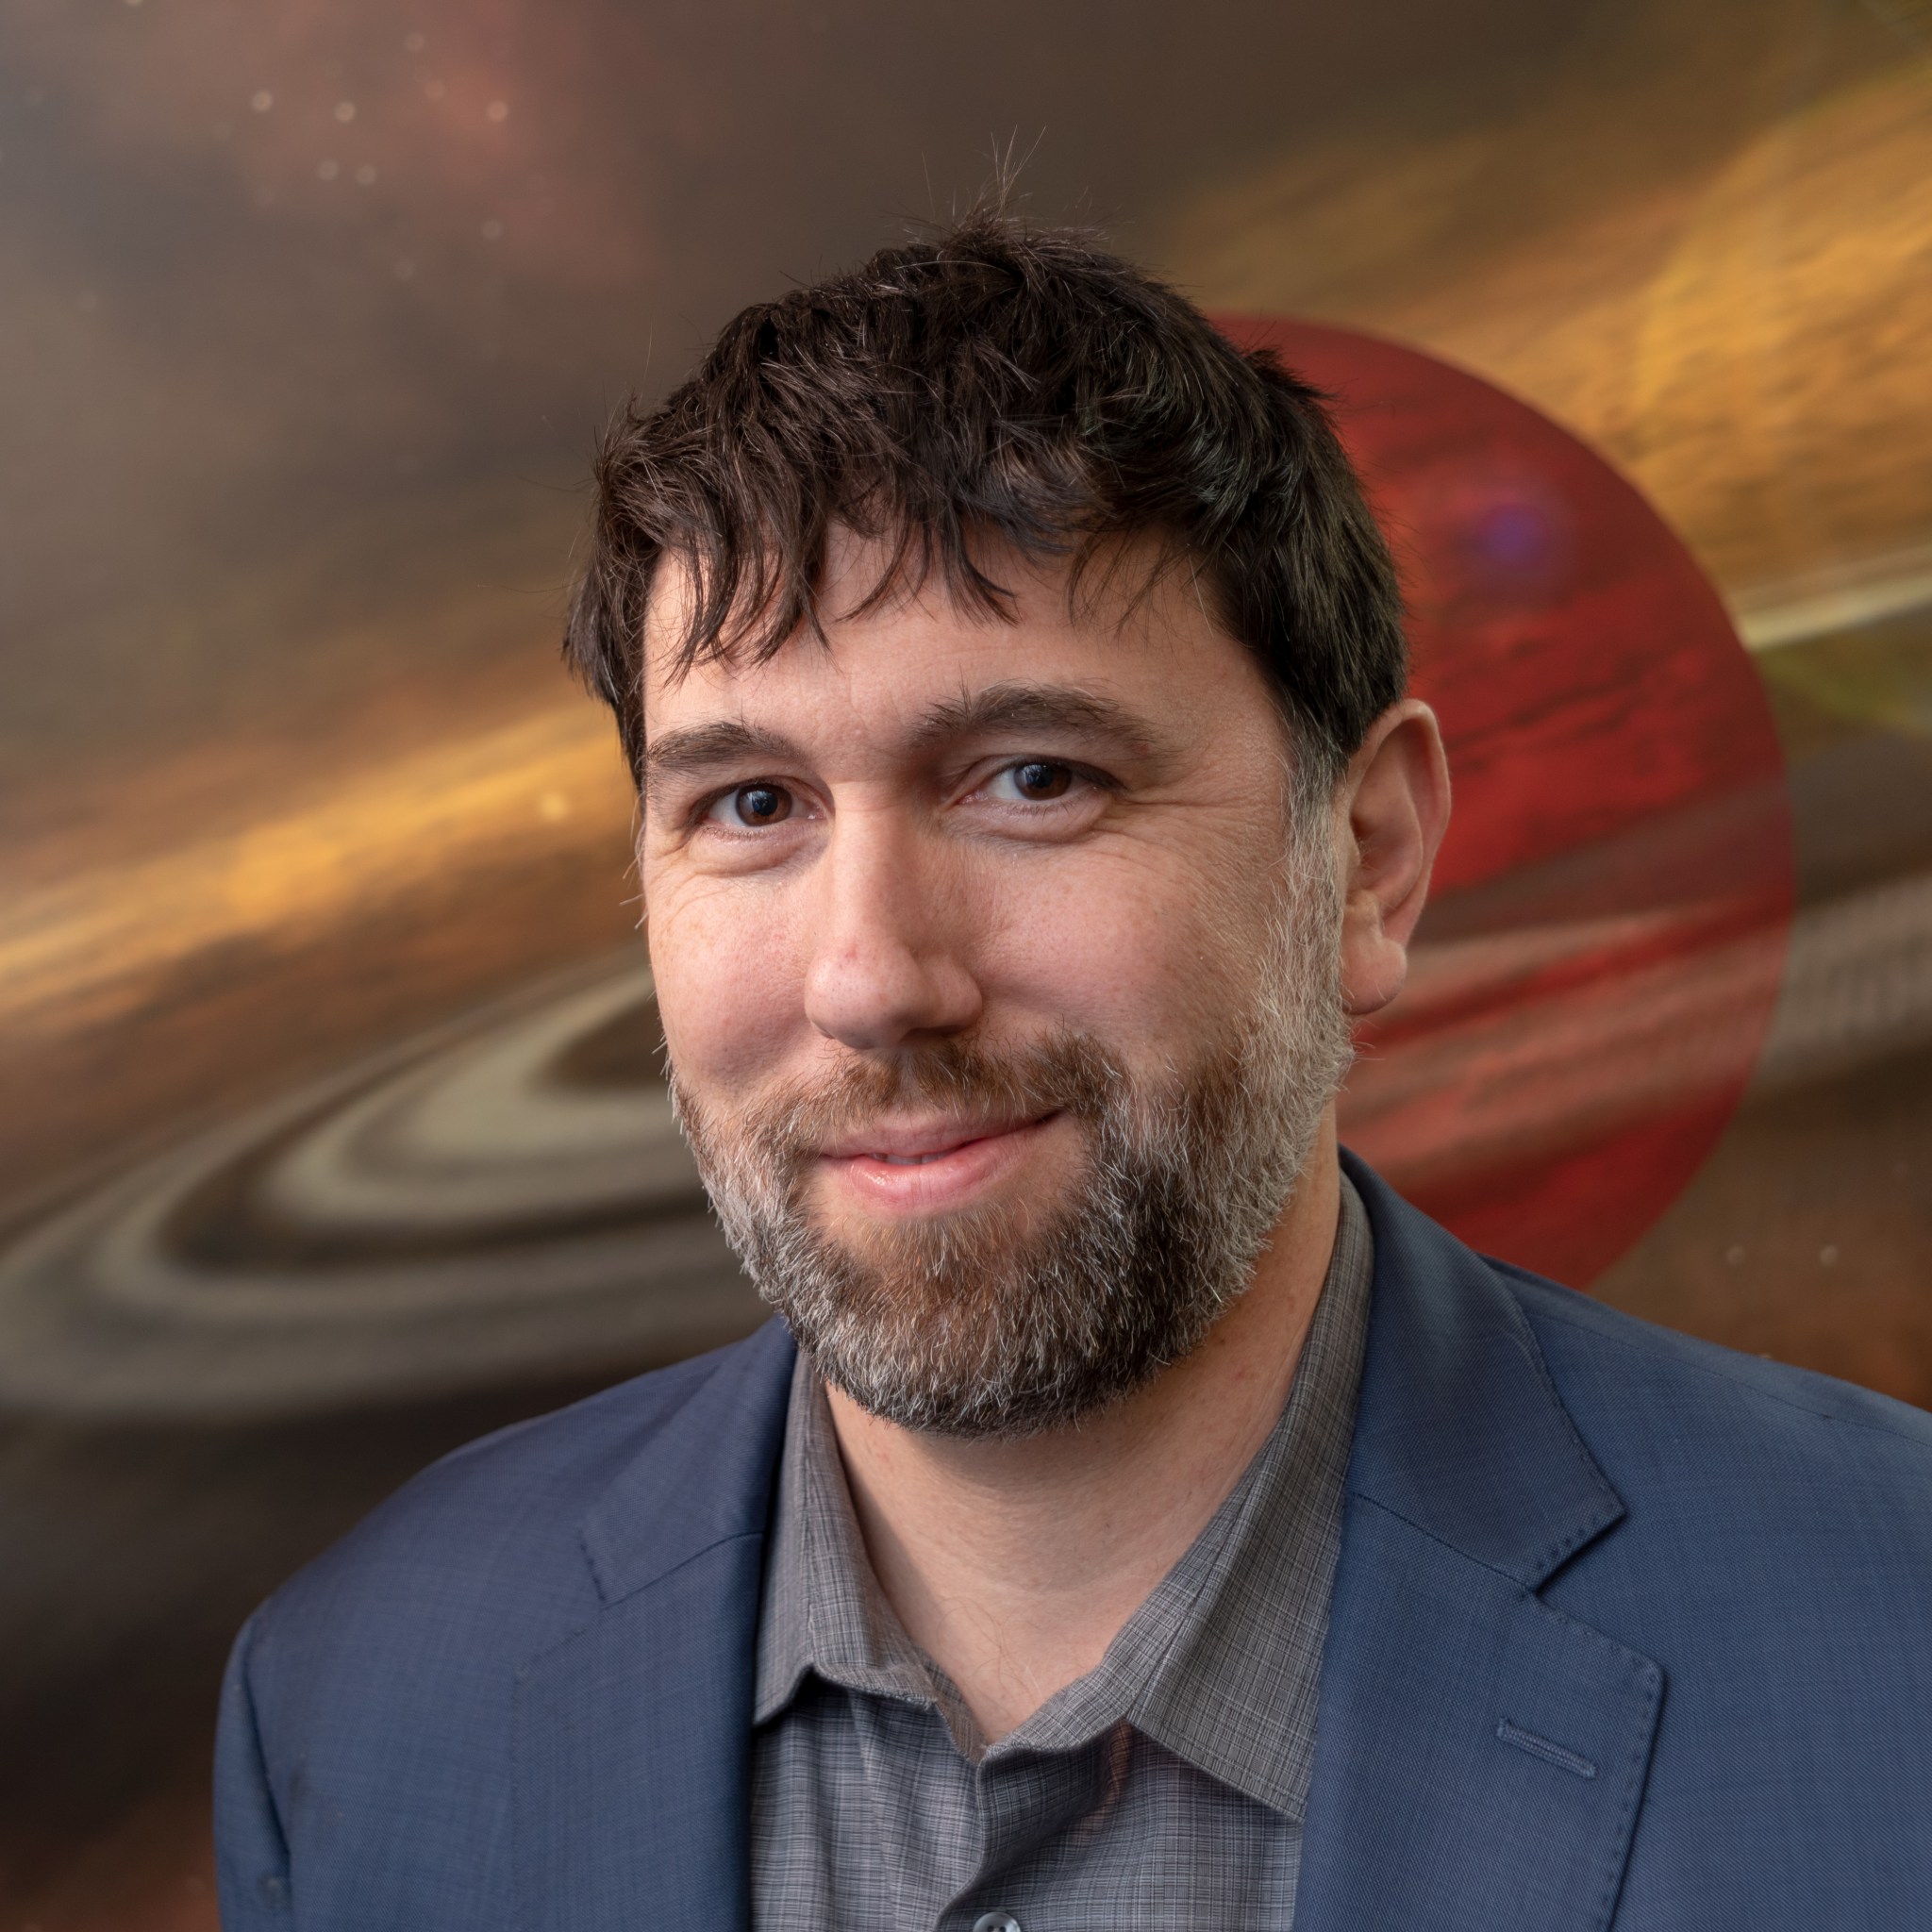 Man fair skin, brown hair and brown and grey facial hair wears a grey shirt and blue blazer. His headshot is in front of an illustration of Saturn  in shades of red, yellow and brown.